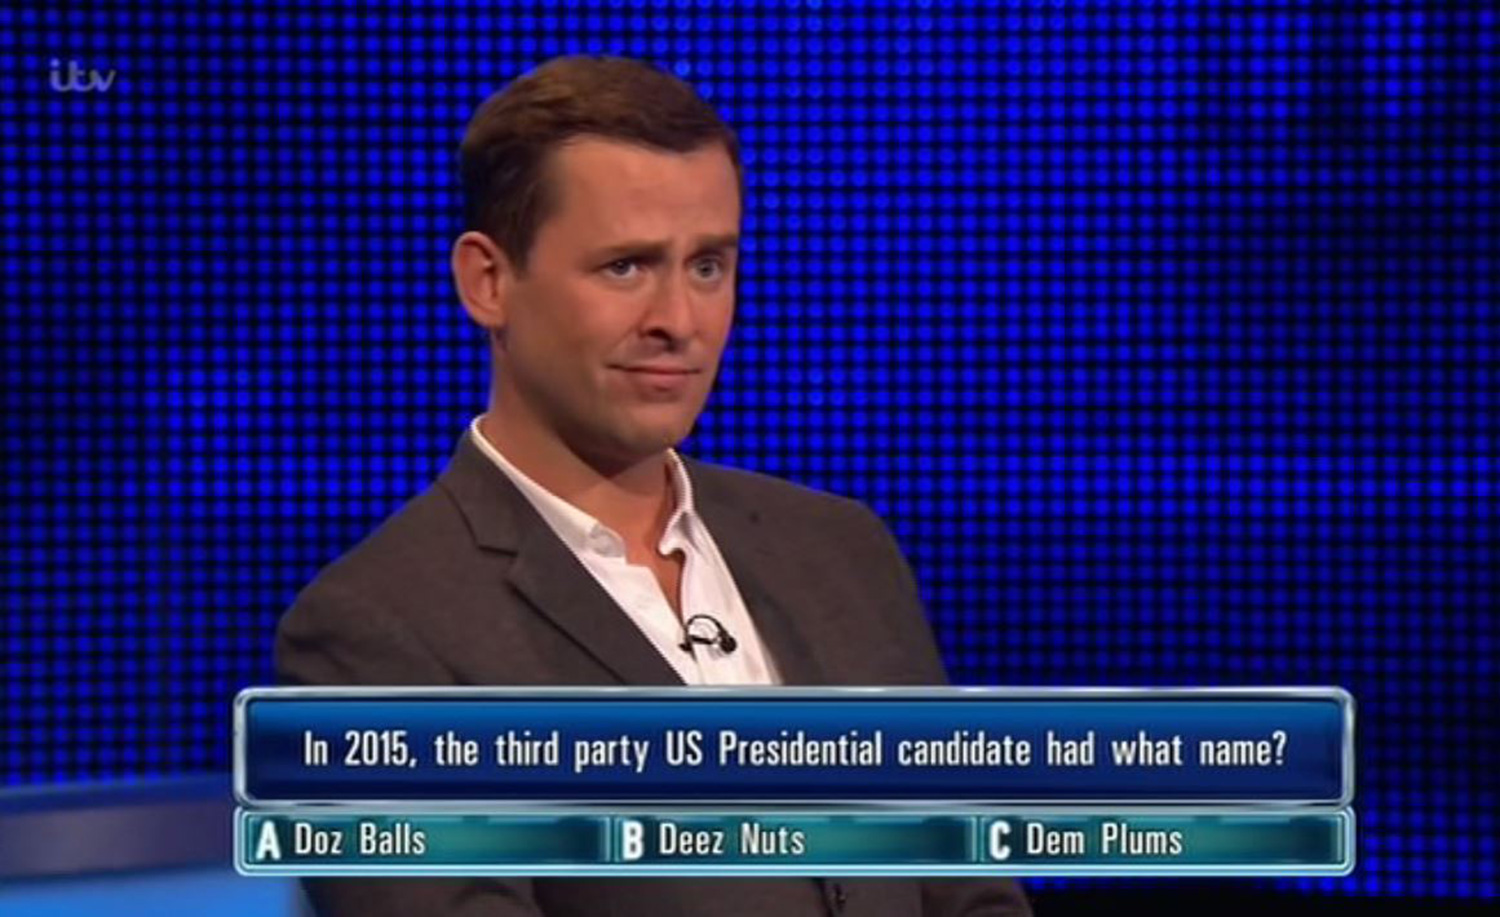 Mills’ appearance on The Chase goes viral